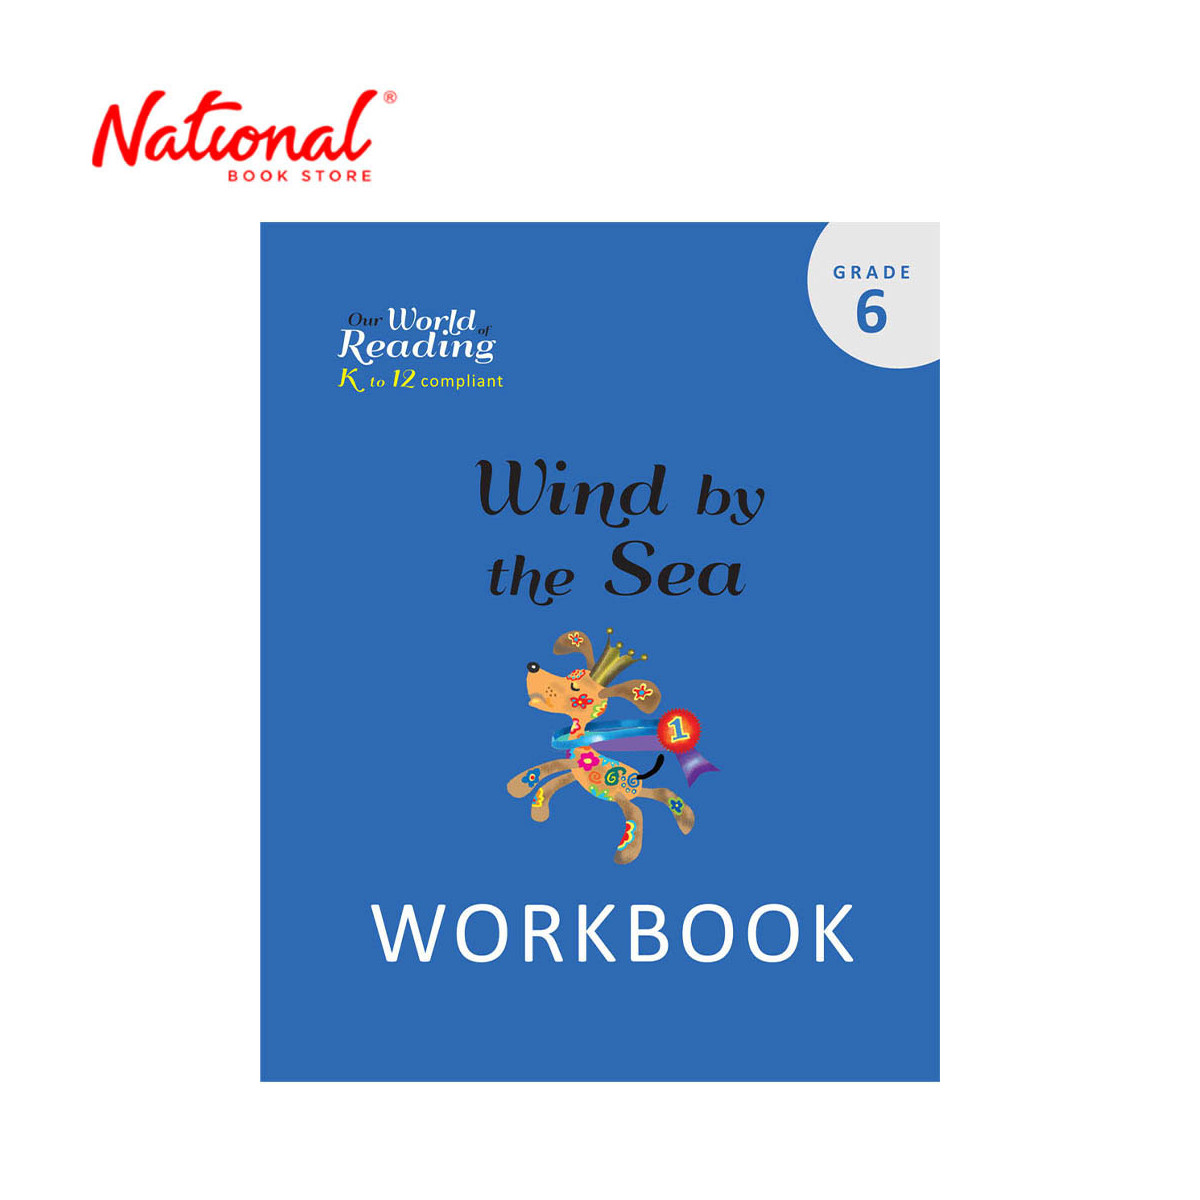 Our World Of Reading Grade 6 Workbook: Wind by the Sea by Mailin Locsin, et.al - Trade Paperback